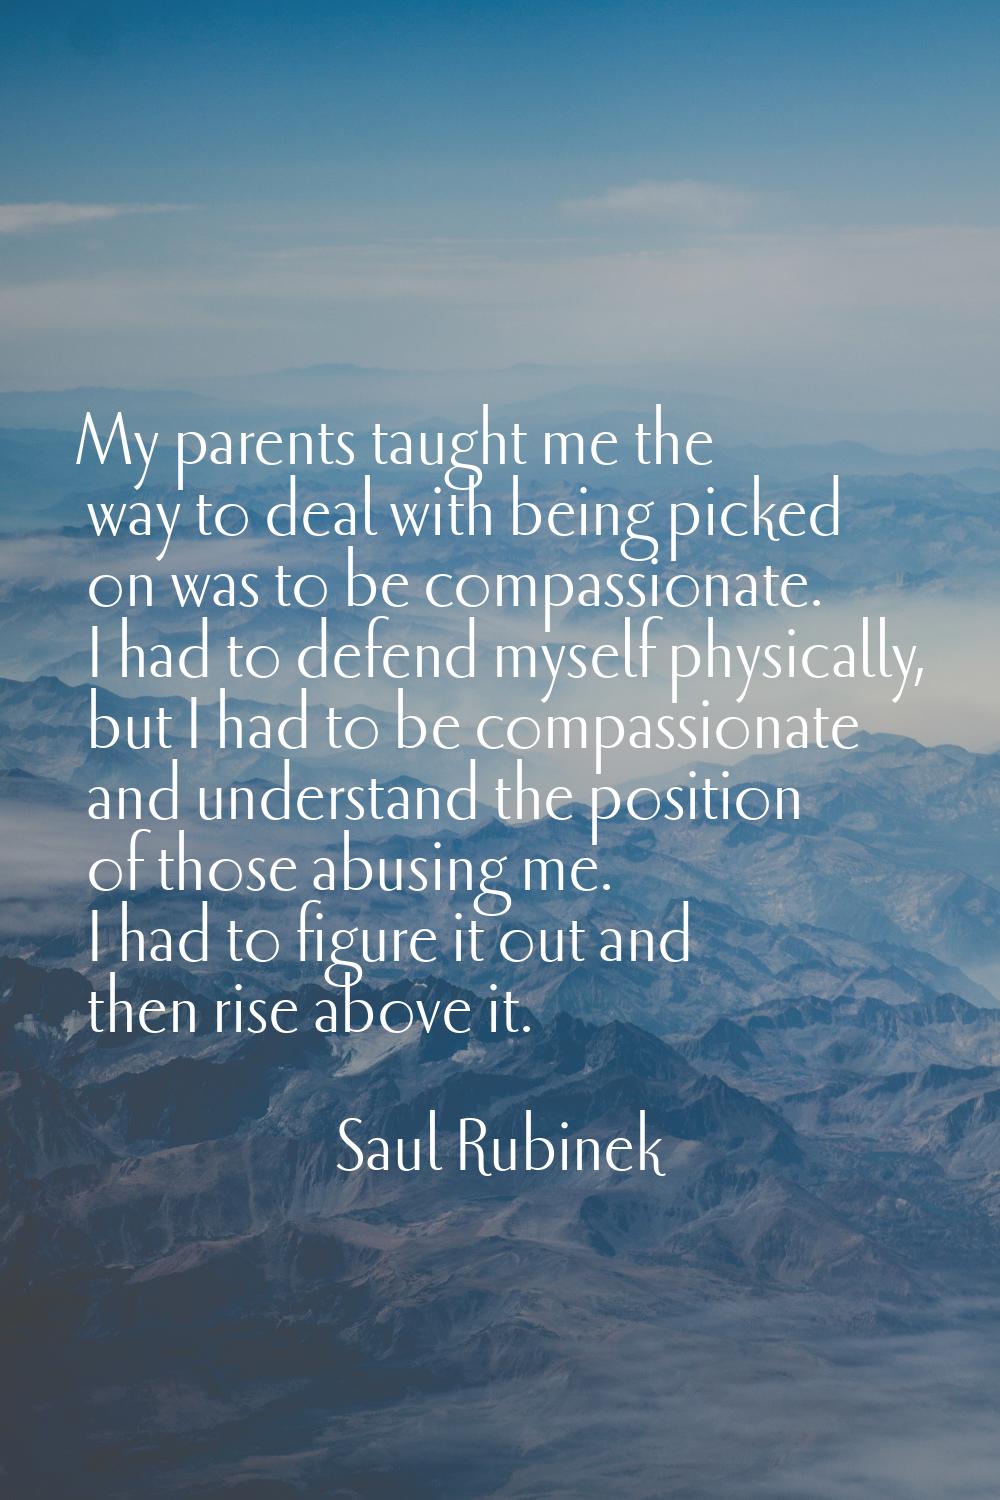 My parents taught me the way to deal with being picked on was to be compassionate. I had to defend 